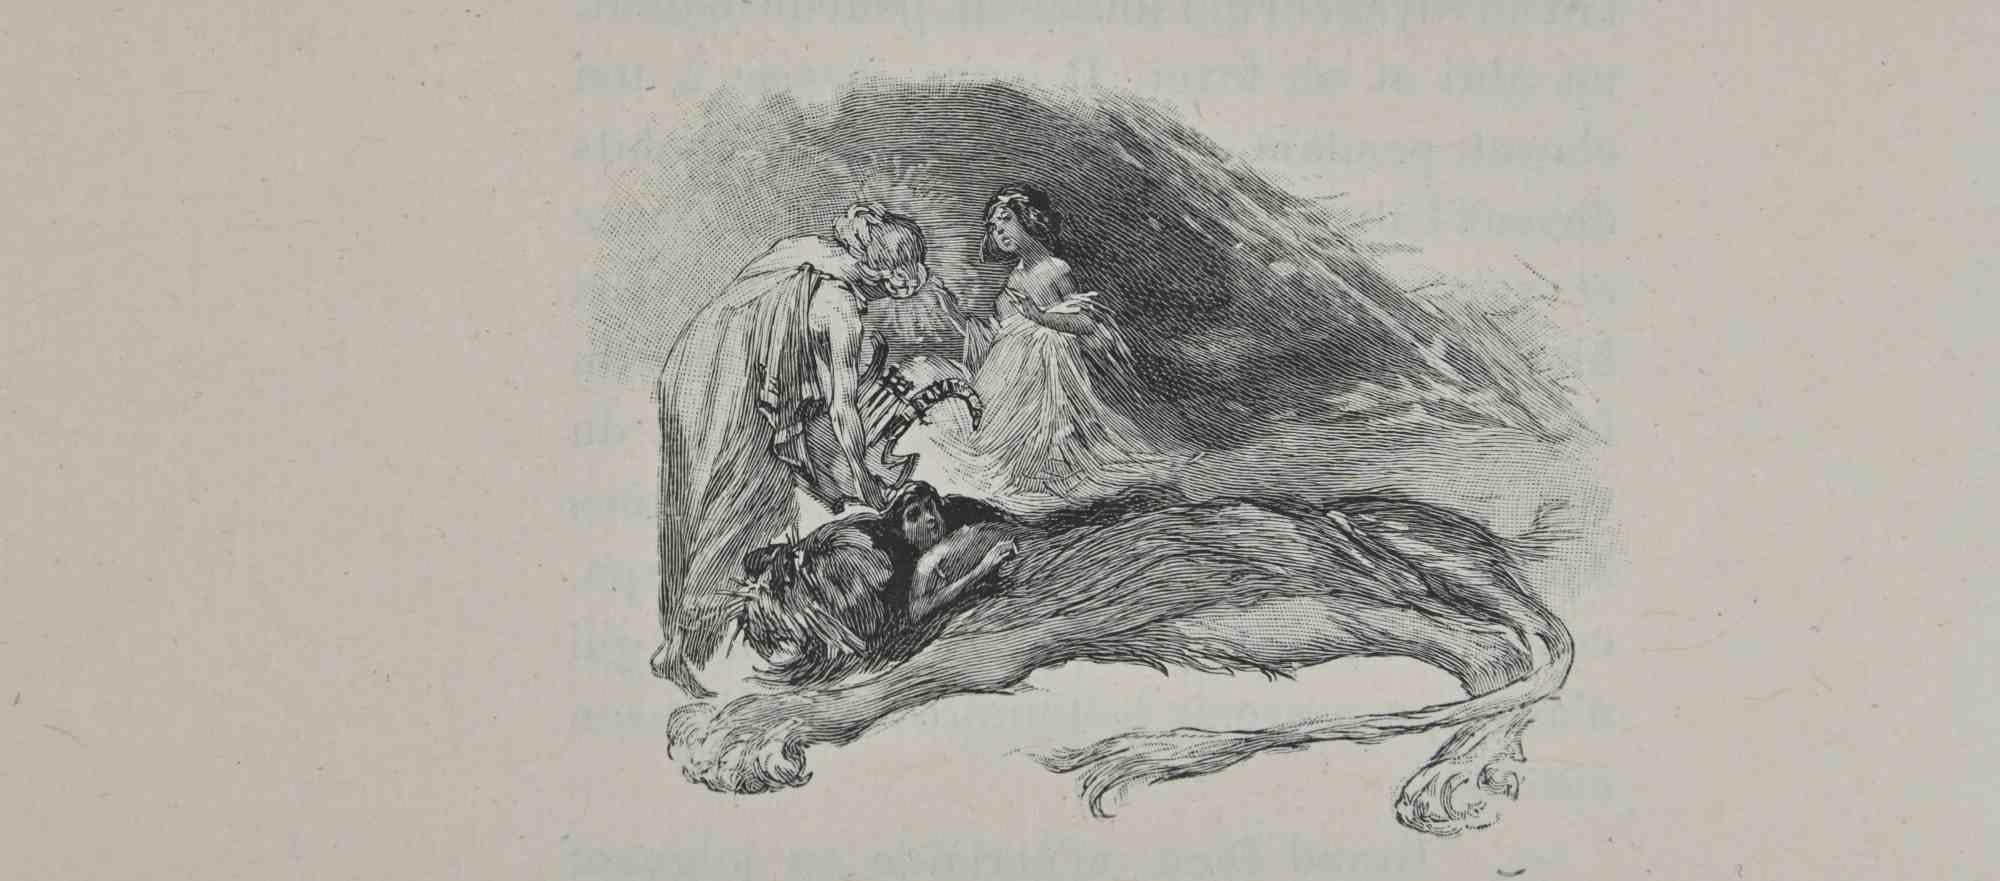 Fairy and Lion is a lithograph on paper realized by Hégésippe Moreau in 1838.

The artwork is in good conditions.

Hégésippe Moreau (1810-1838) was a French lyric poet. The romantic myth was solidified by the publication of his complete